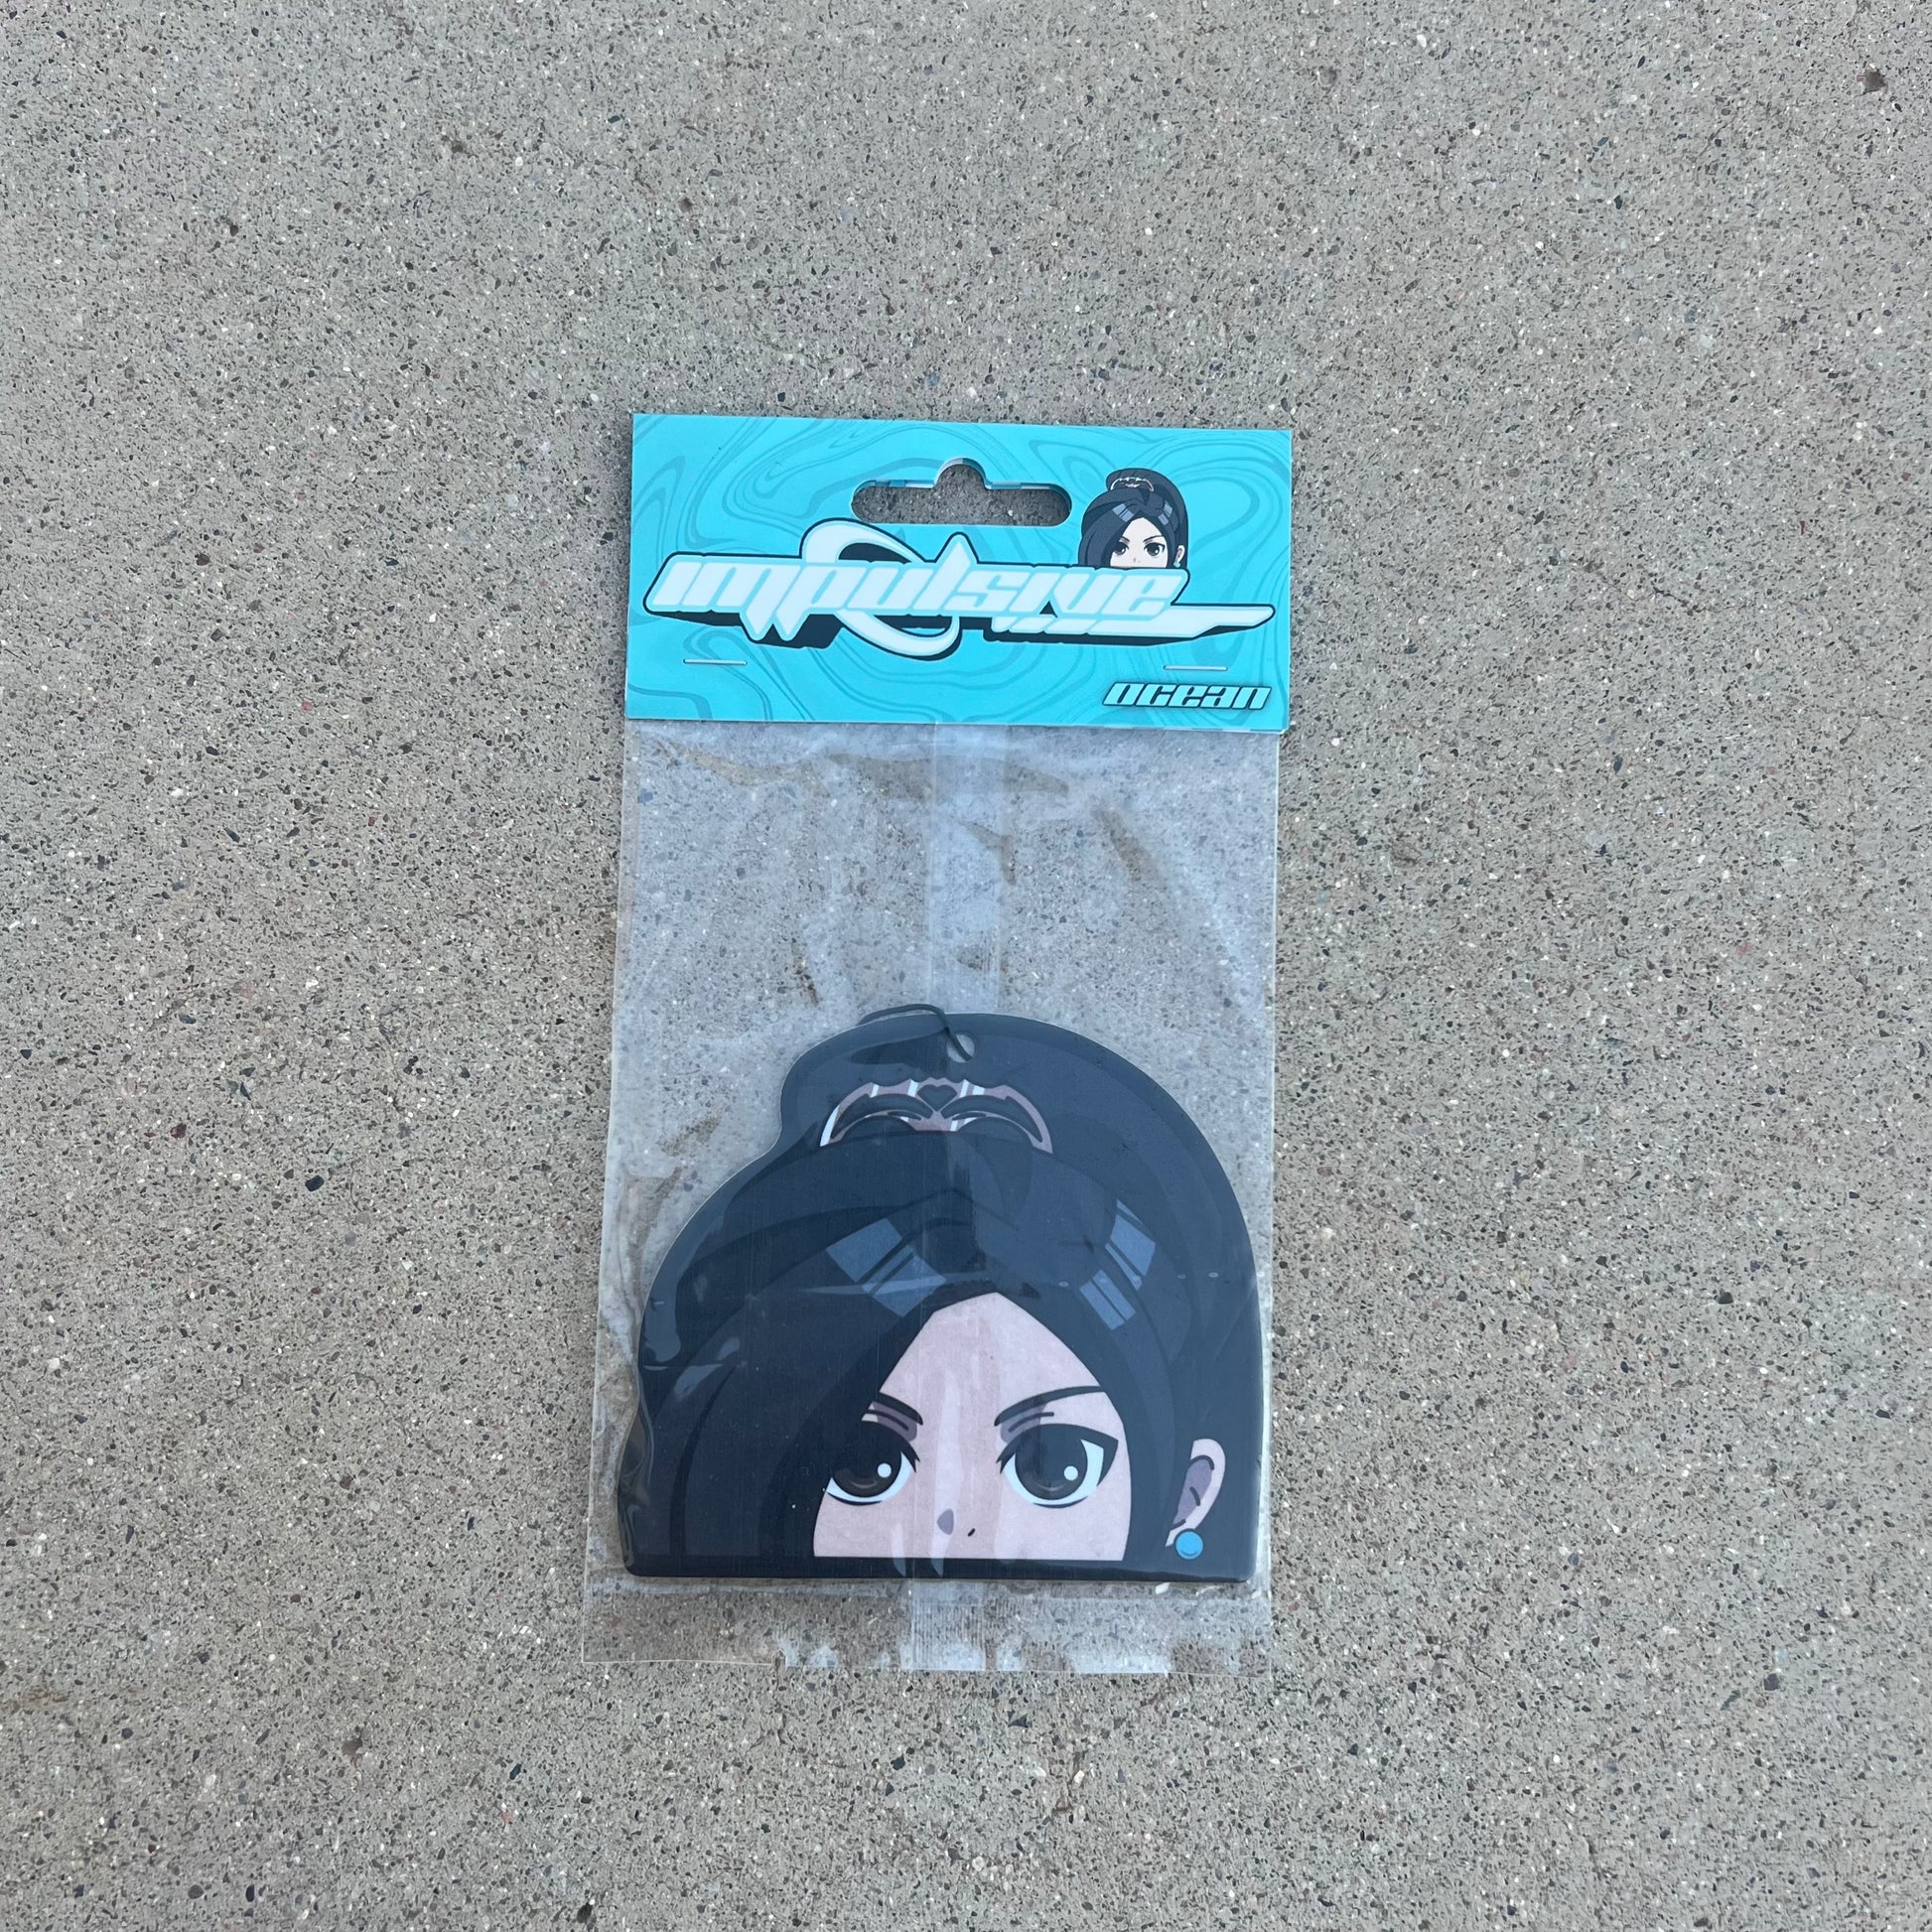 Anime Sage Character air freshener hanging from black string. Asian girl with high pony tail clip, brown eyes and blue pearl earring. Blue swirl background impulsive llc retro y2k logo with ocean scent label cardboard head card packaging.